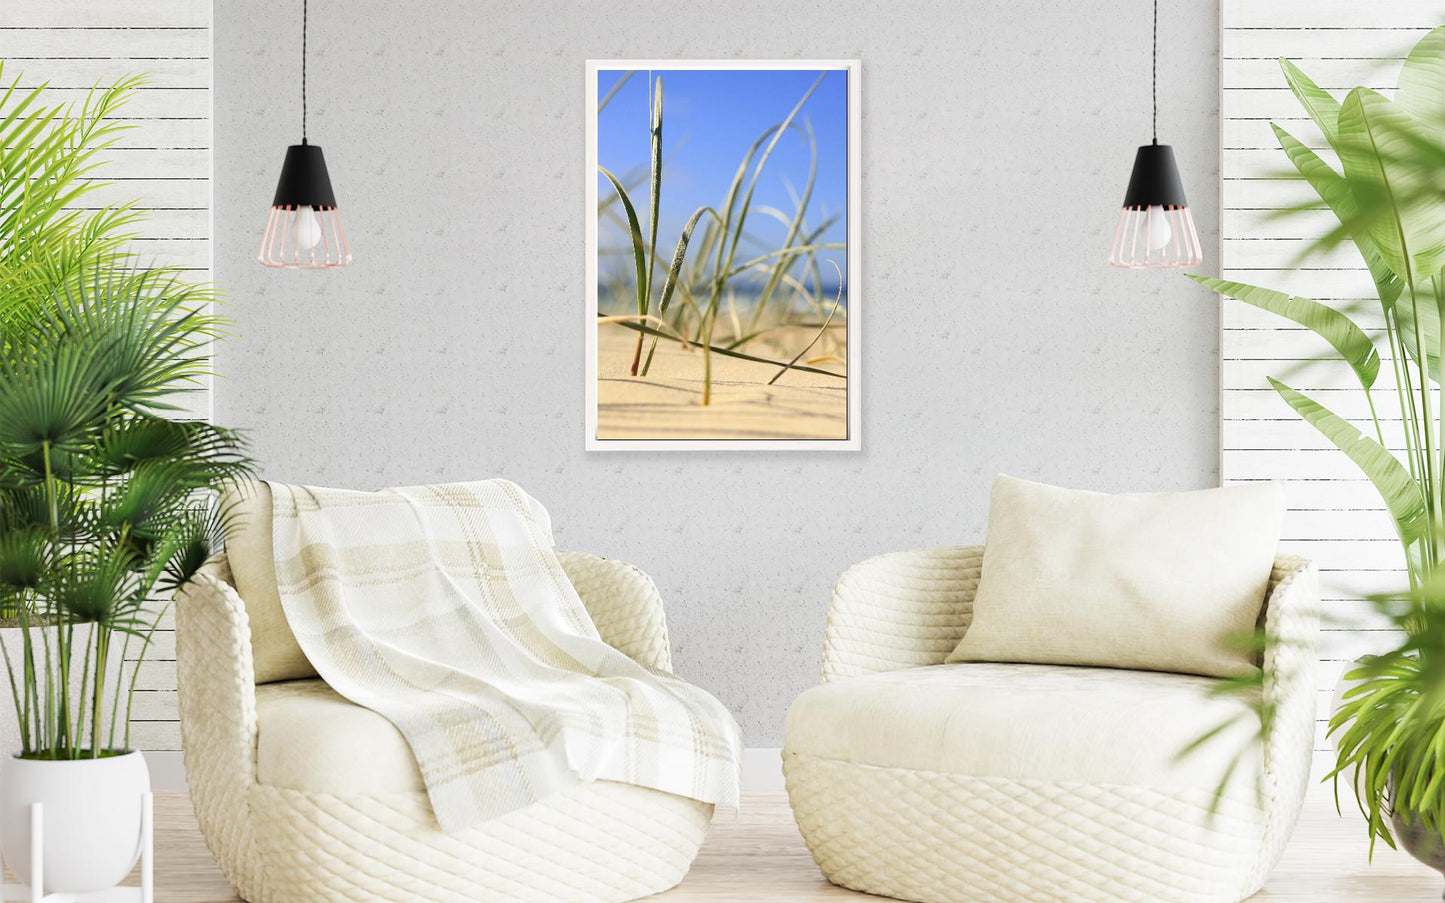 Image 9 - Seagrass-frame-1